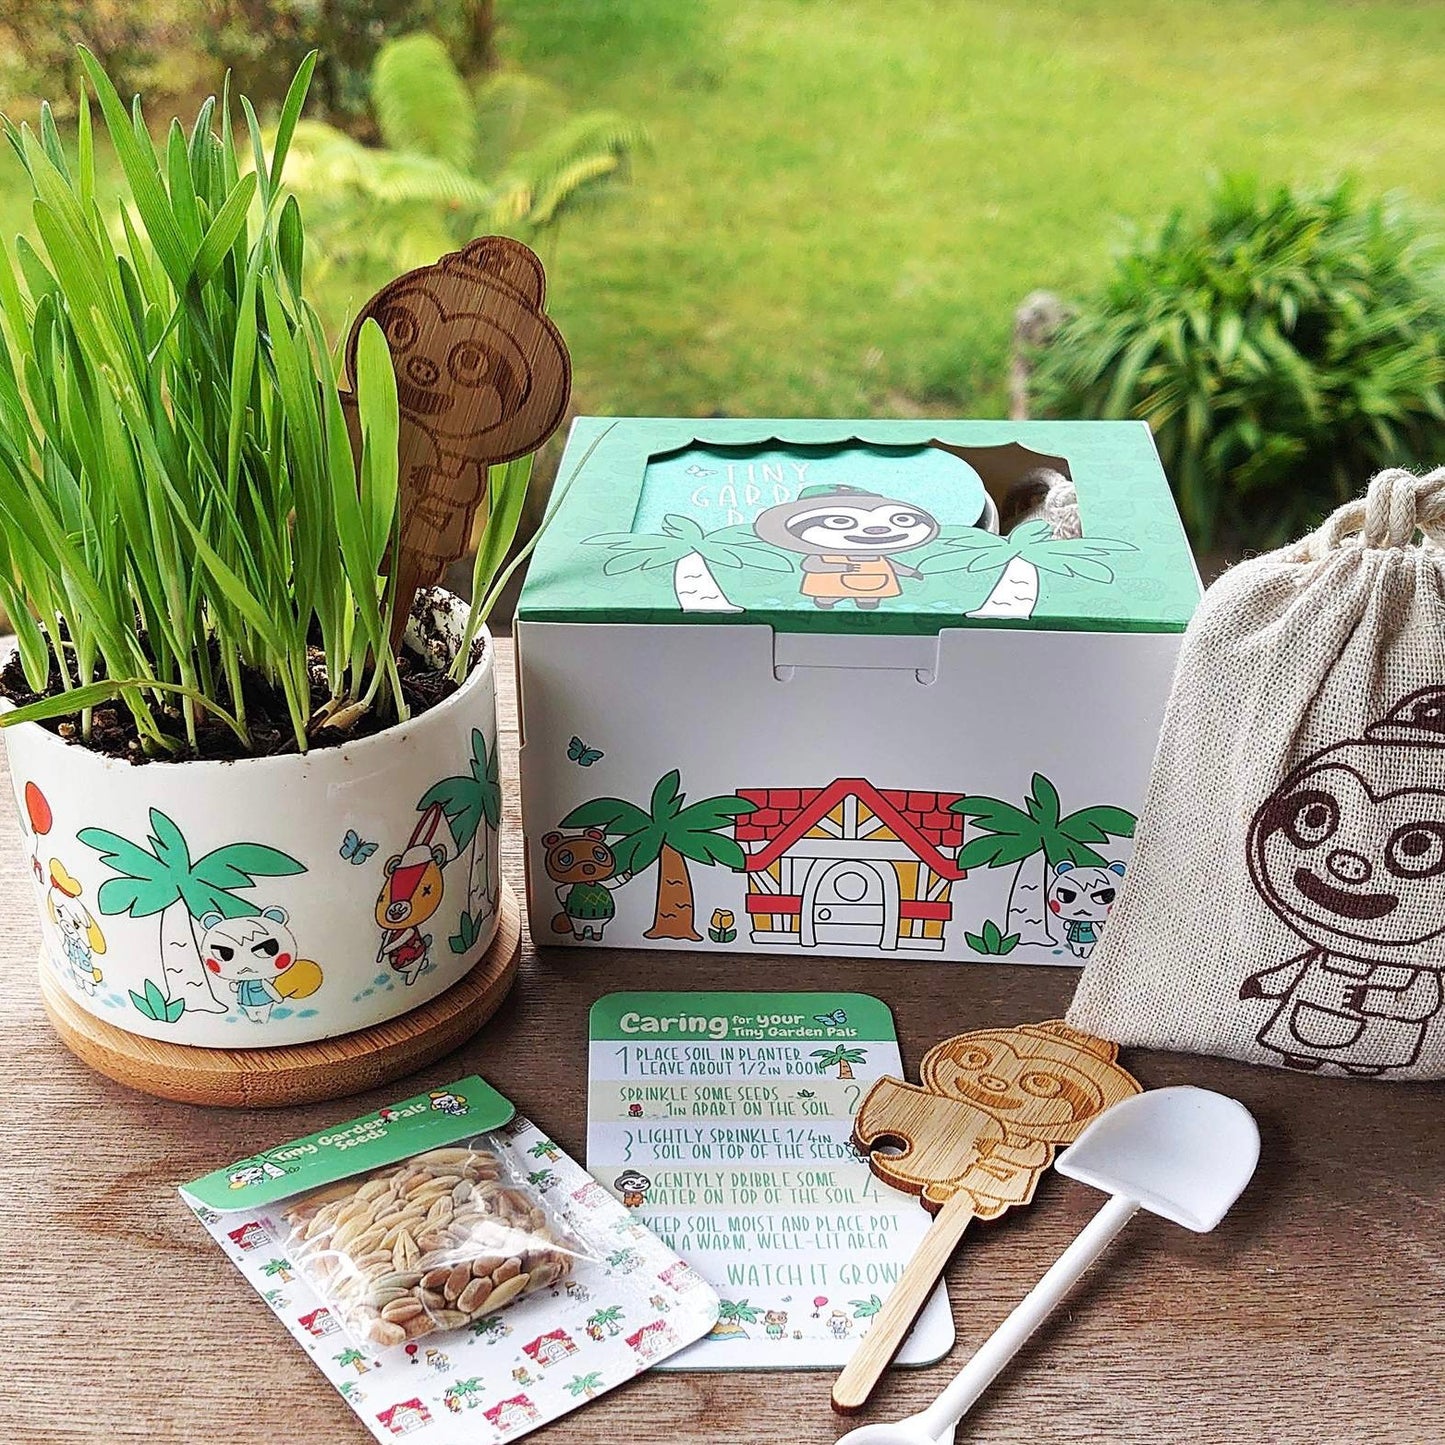 ACNH Inspired Gardening Kit - Tiny Garden Pals with Watering Can